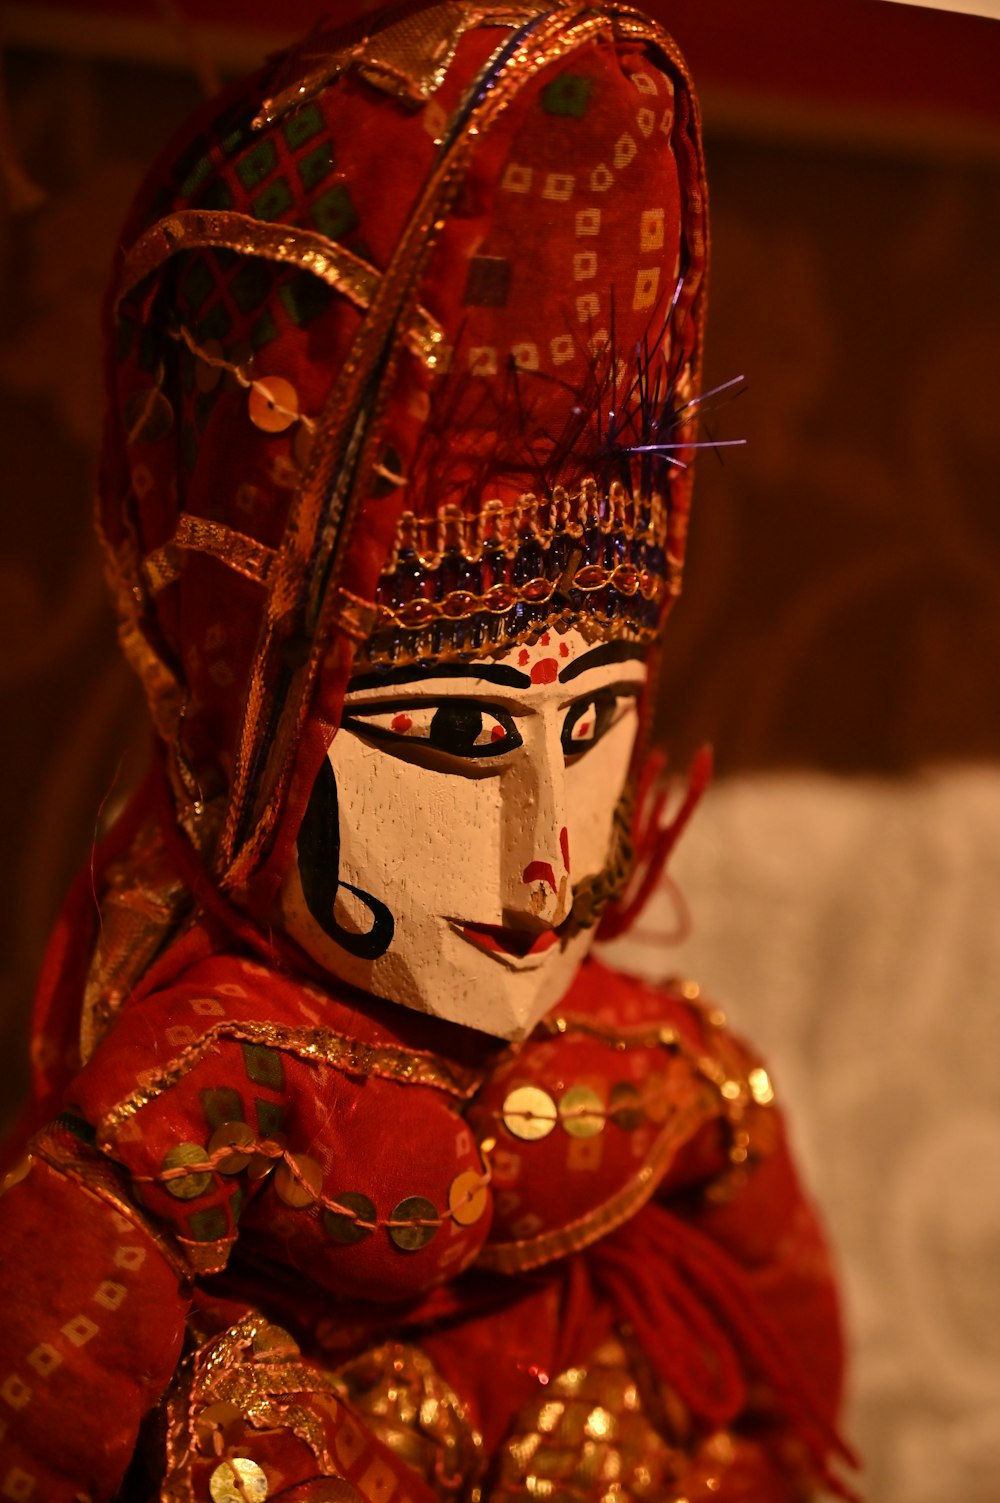 a close up of a person wearing a mask